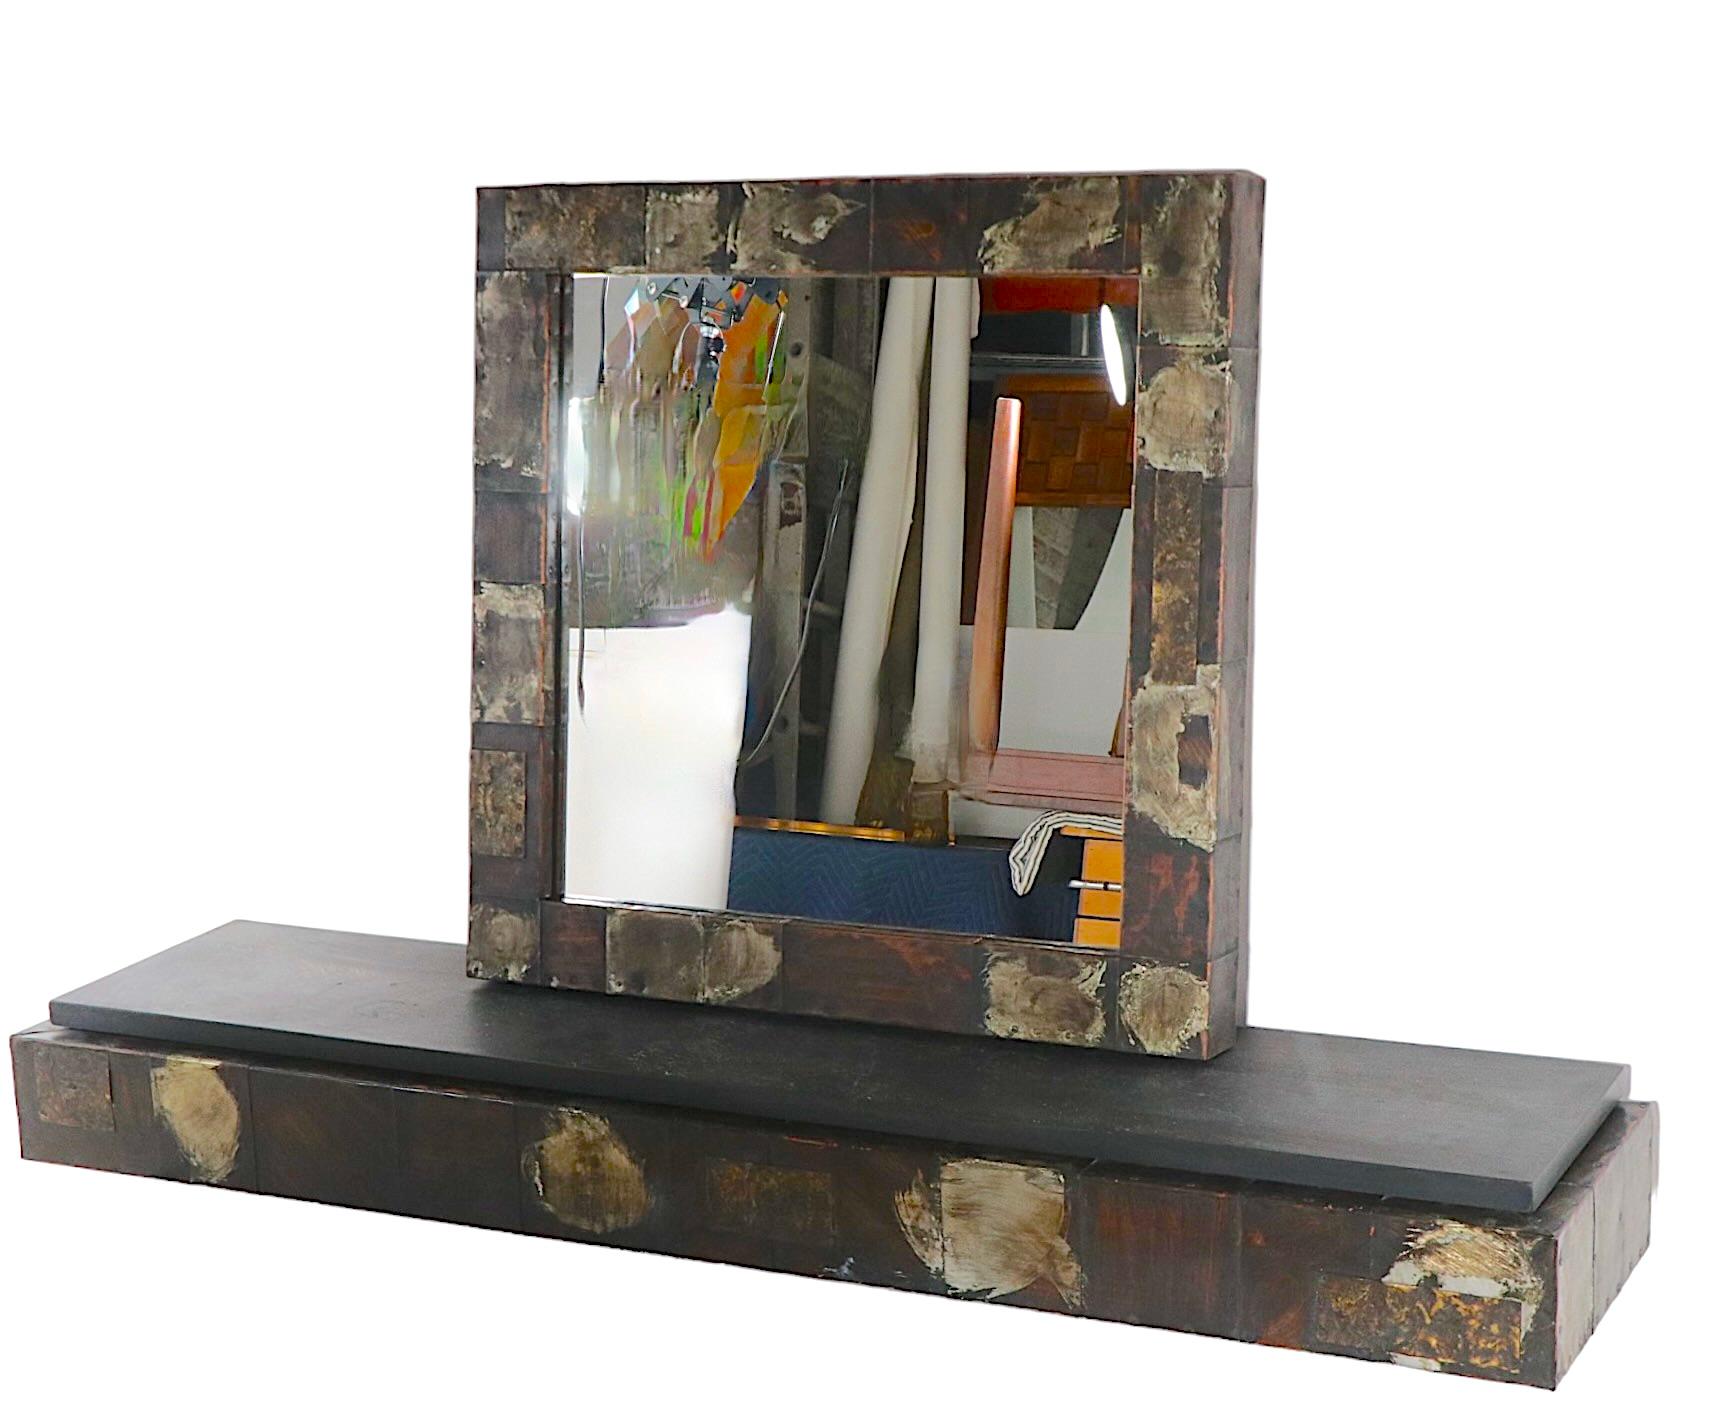 Classic Paul Evans Brutalist slate top console with matching patchwork metal frame mirror. This set features the hard to find extra long ( 60 inch ) wall mount shelf, along with the original matching wall mount mirror. Both pieces are in excellent